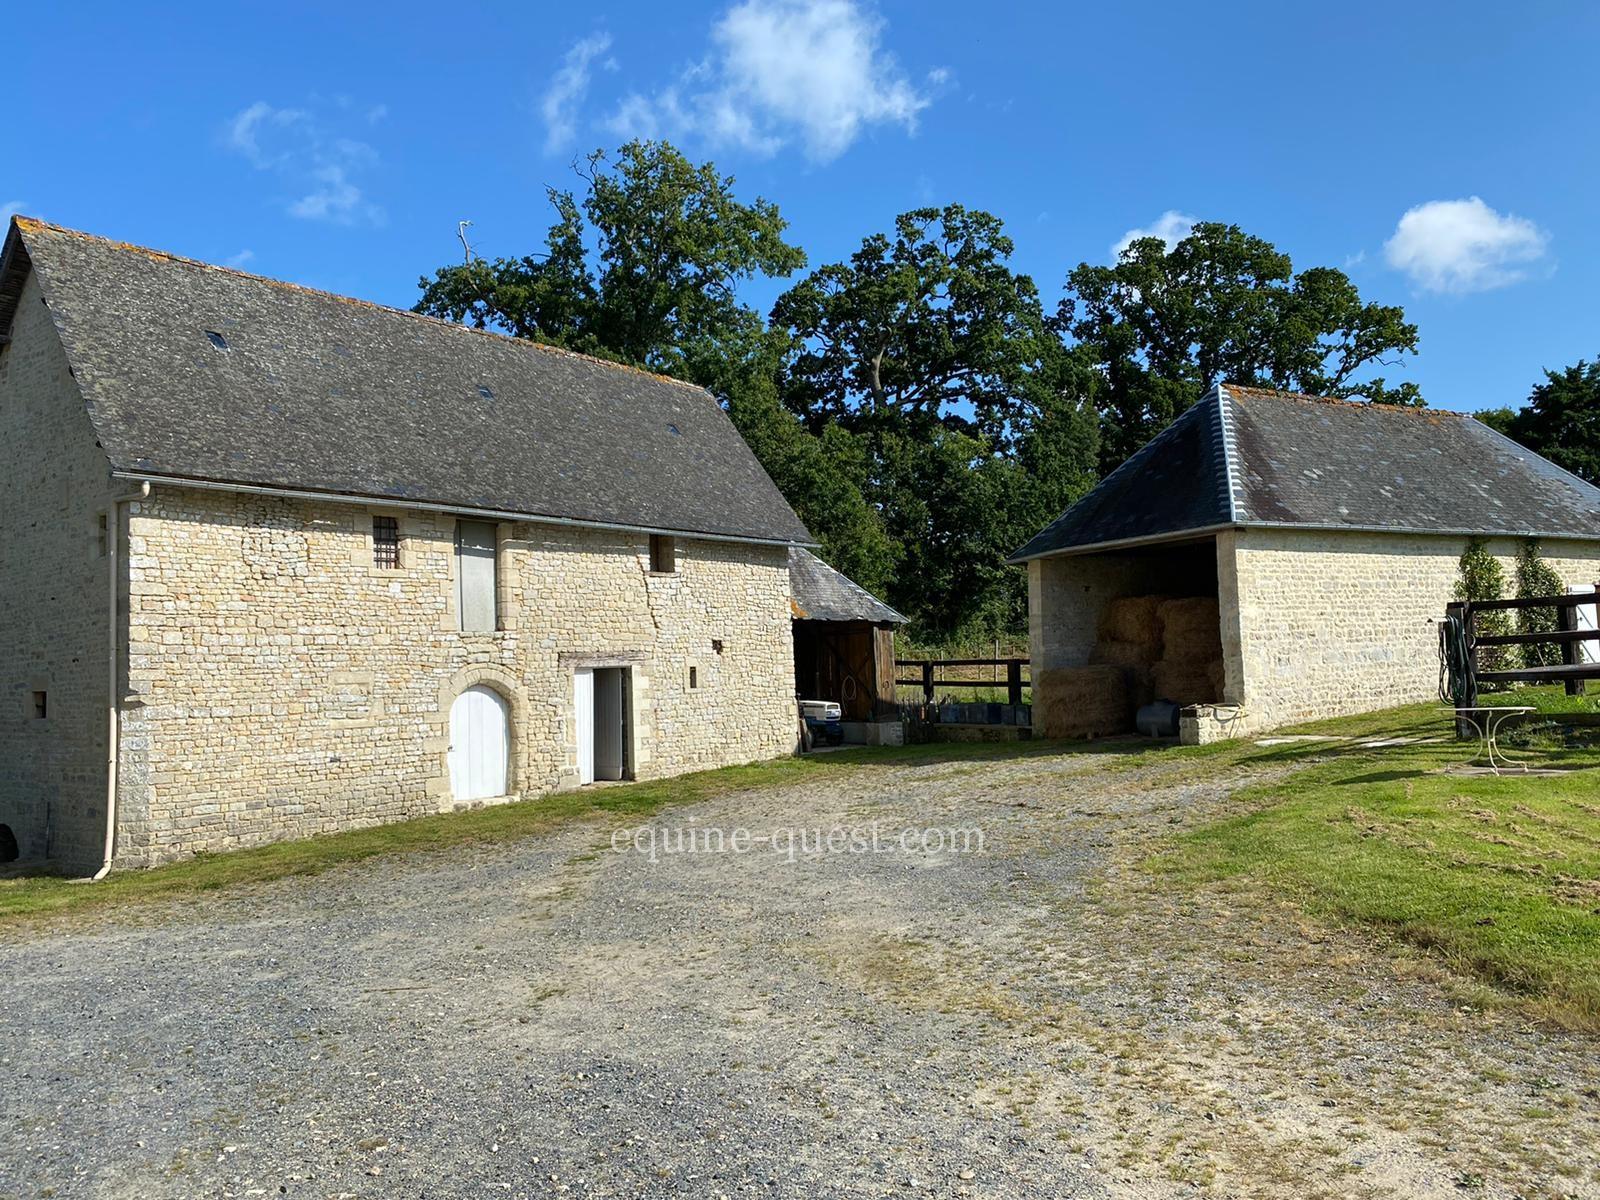 Equestrian property – Bayeux area -16,5 hectares